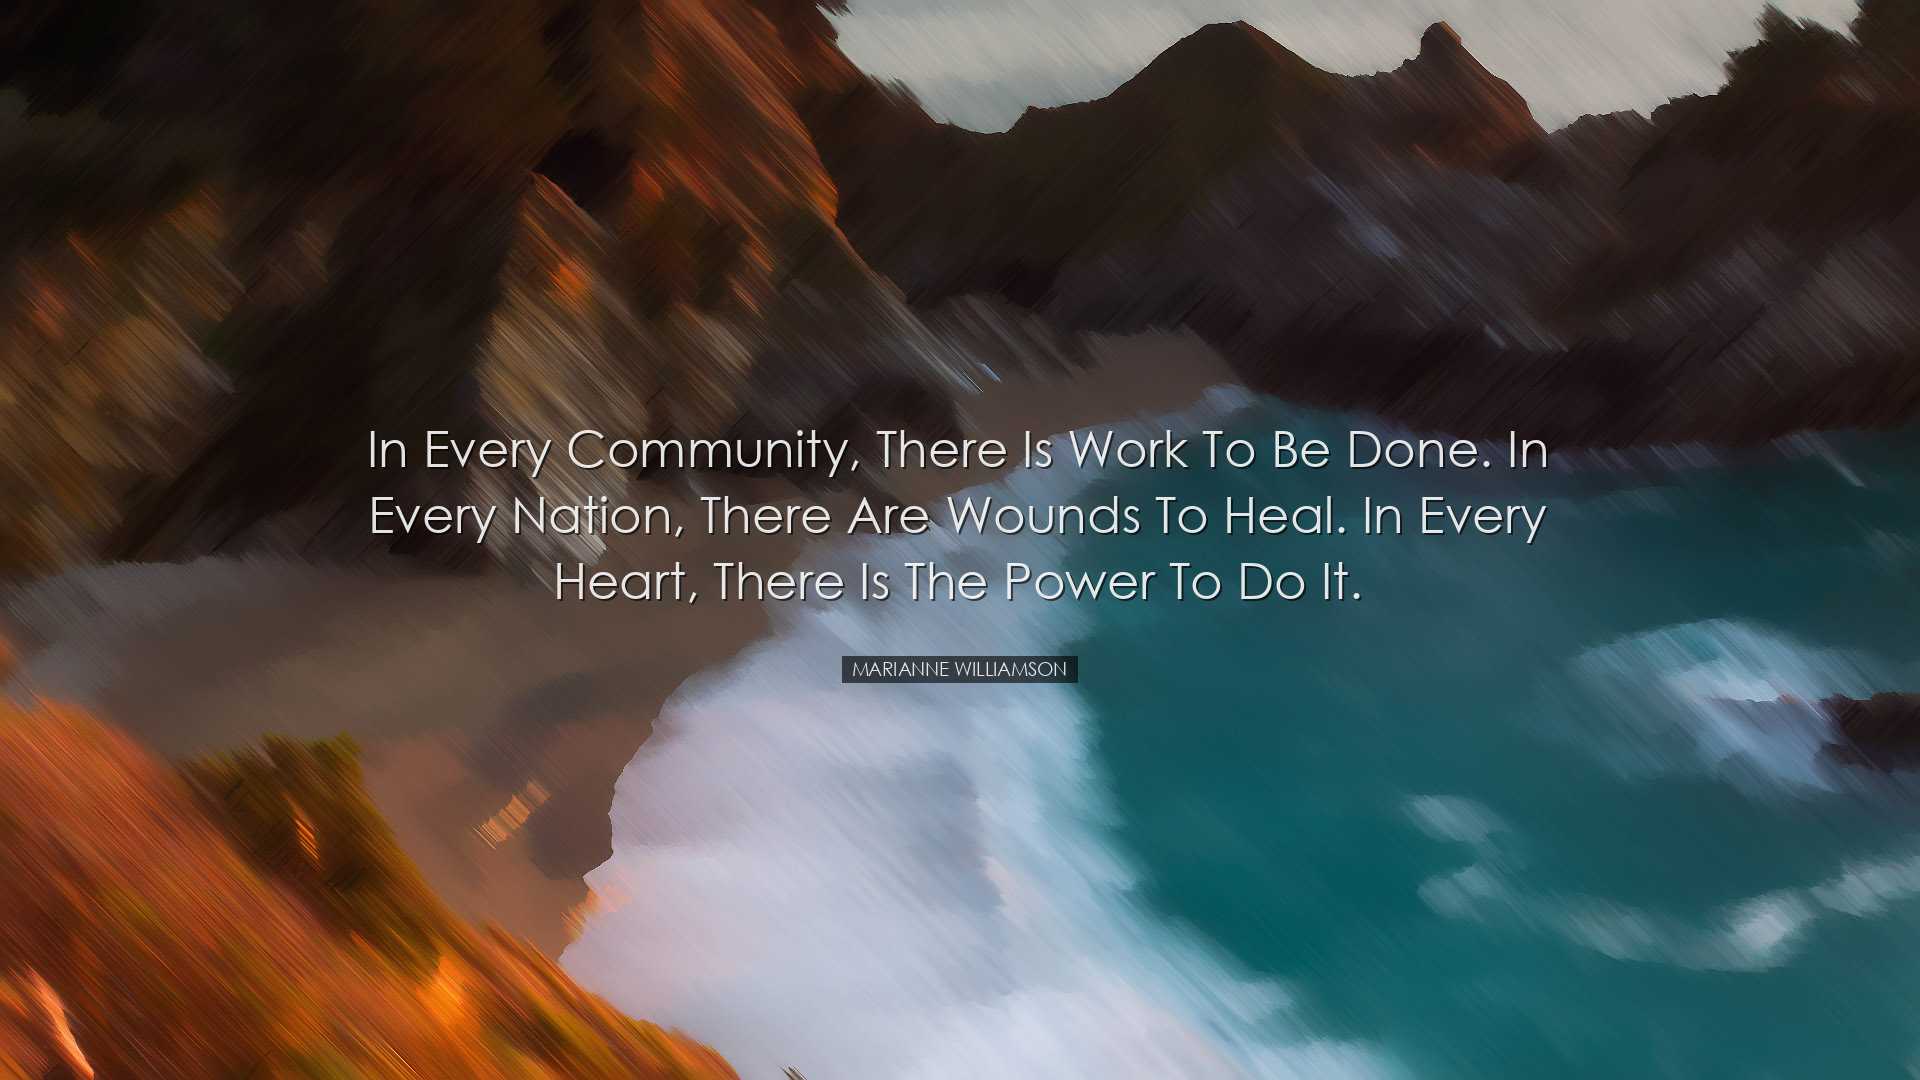 In every community, there is work to be done. In every nation, the